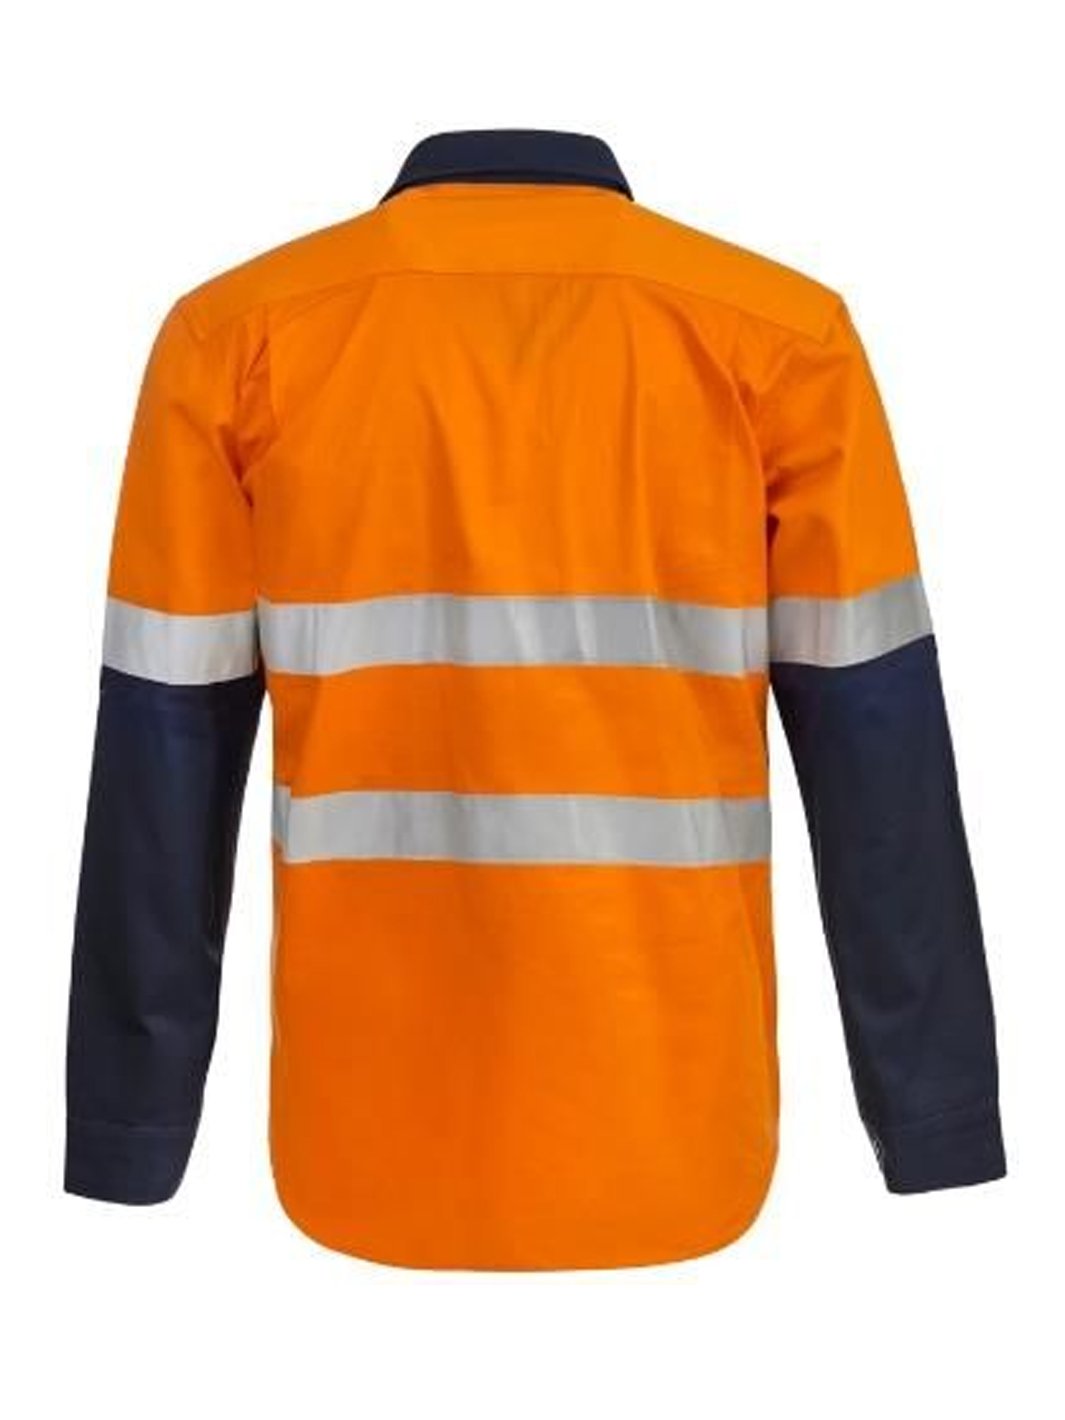 WorkCraft Hi Vis Taped Two Tone Heavy Duty Hybrid Cotton Drill Shirt LS w/Gusset Sleeves WS6031